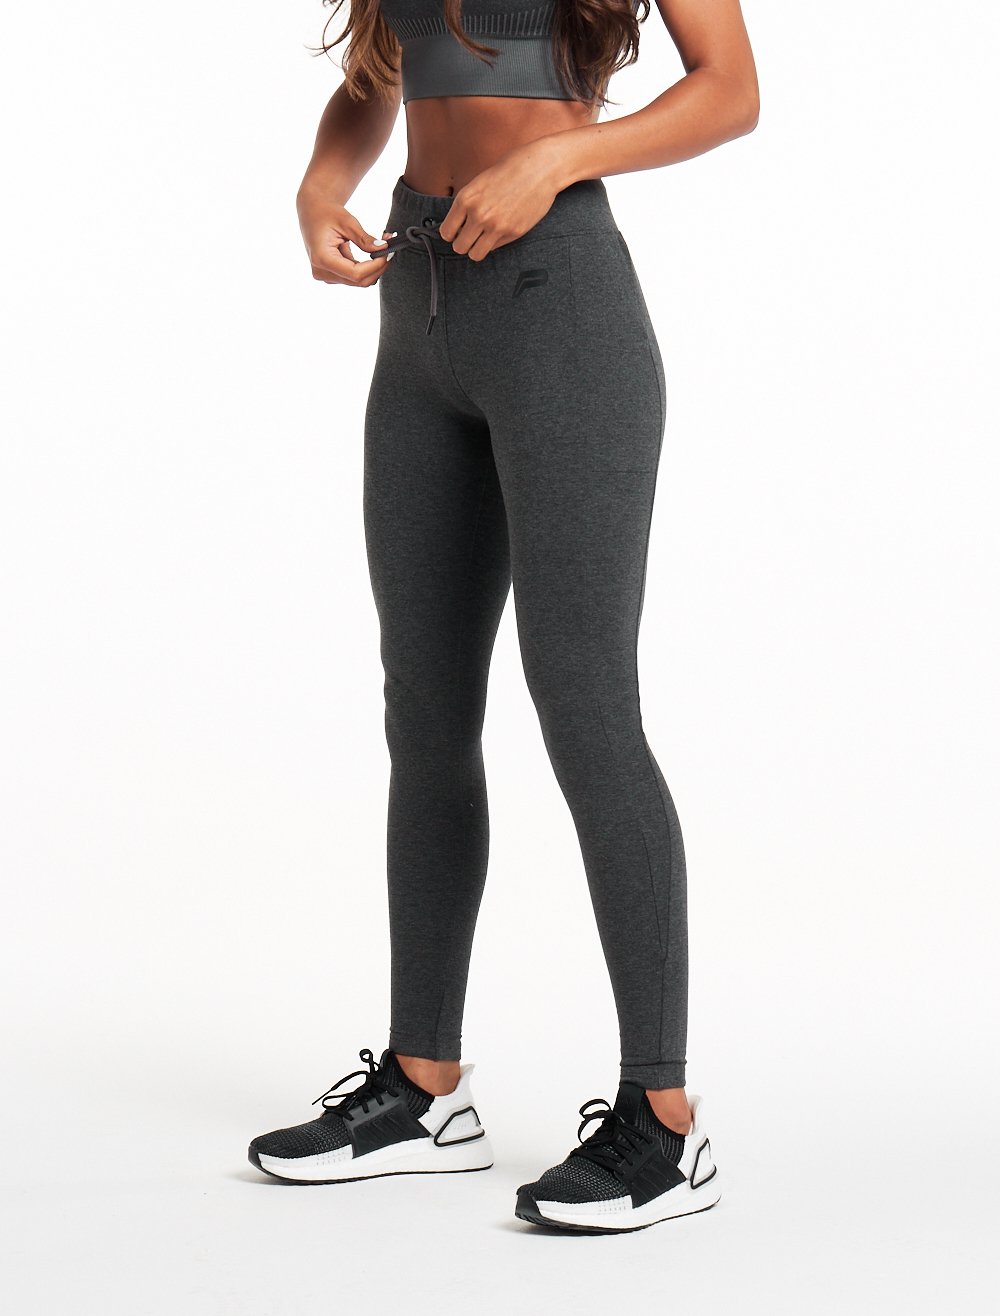 products/womens-profit-bottoms-002-charcoal.jpg